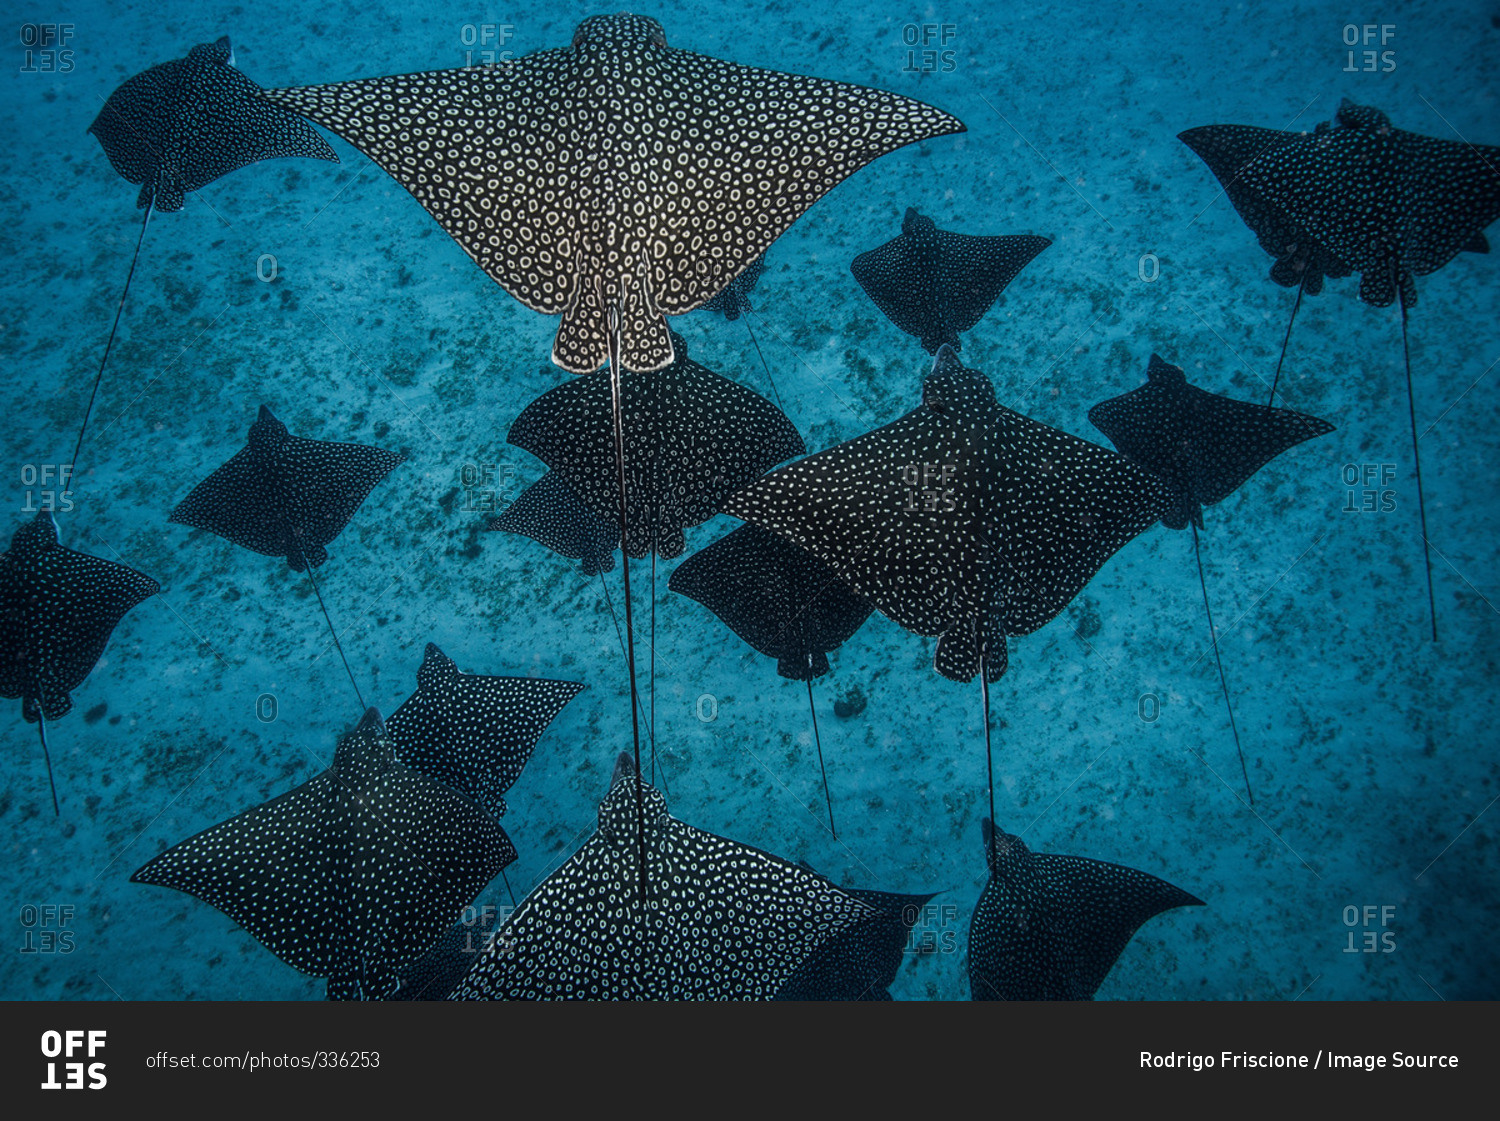 Underwater overhead view of spotted eagle rays casting shadows on seabed, Cancun, Mexico